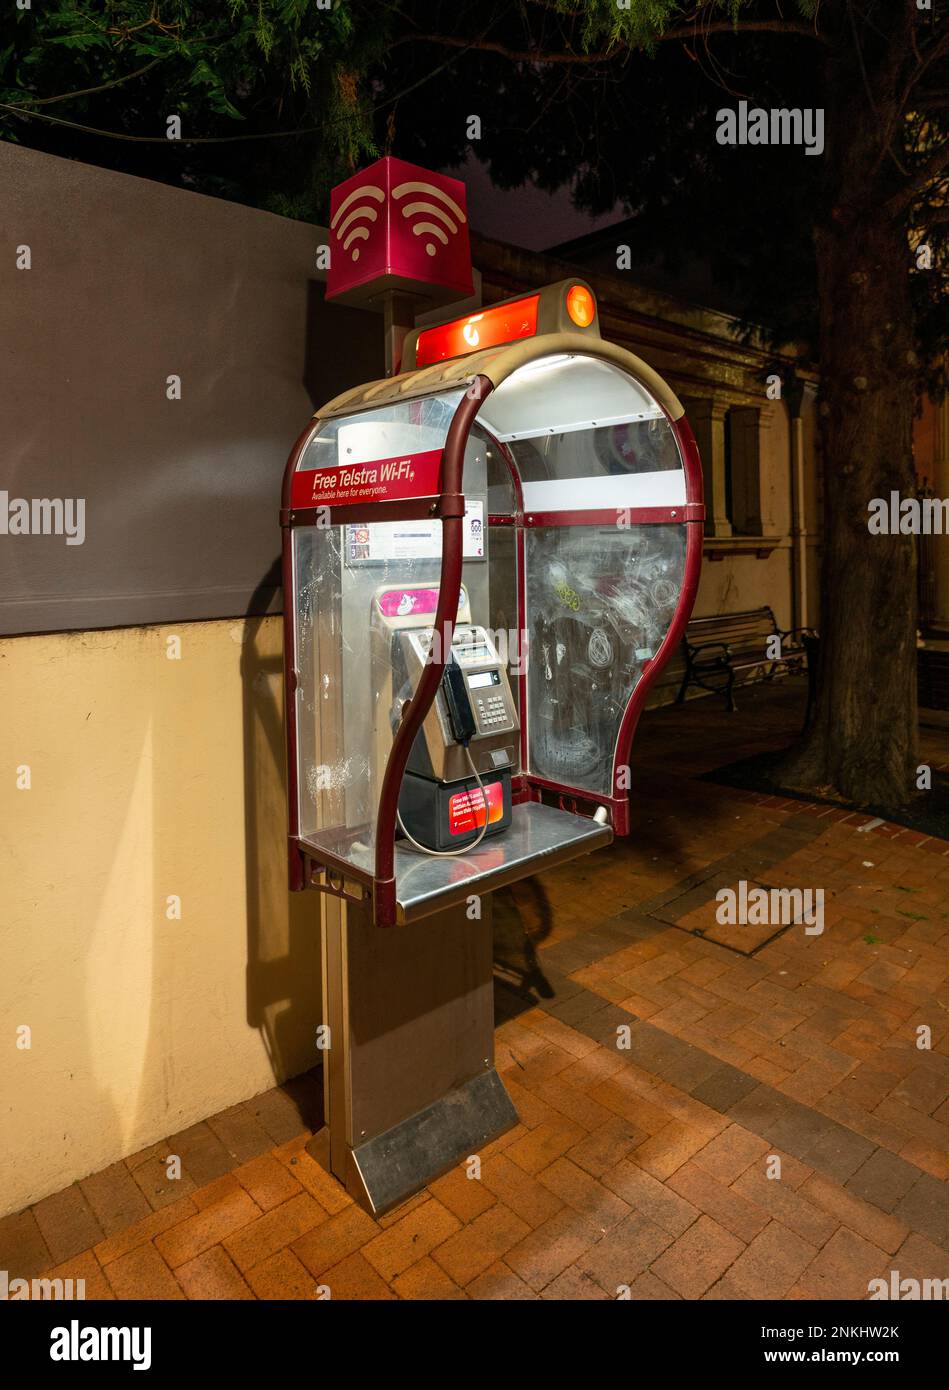 Telstra phone booth and smart payphone, now free to use,  in Armidale in new south wales, australia Stock Photo